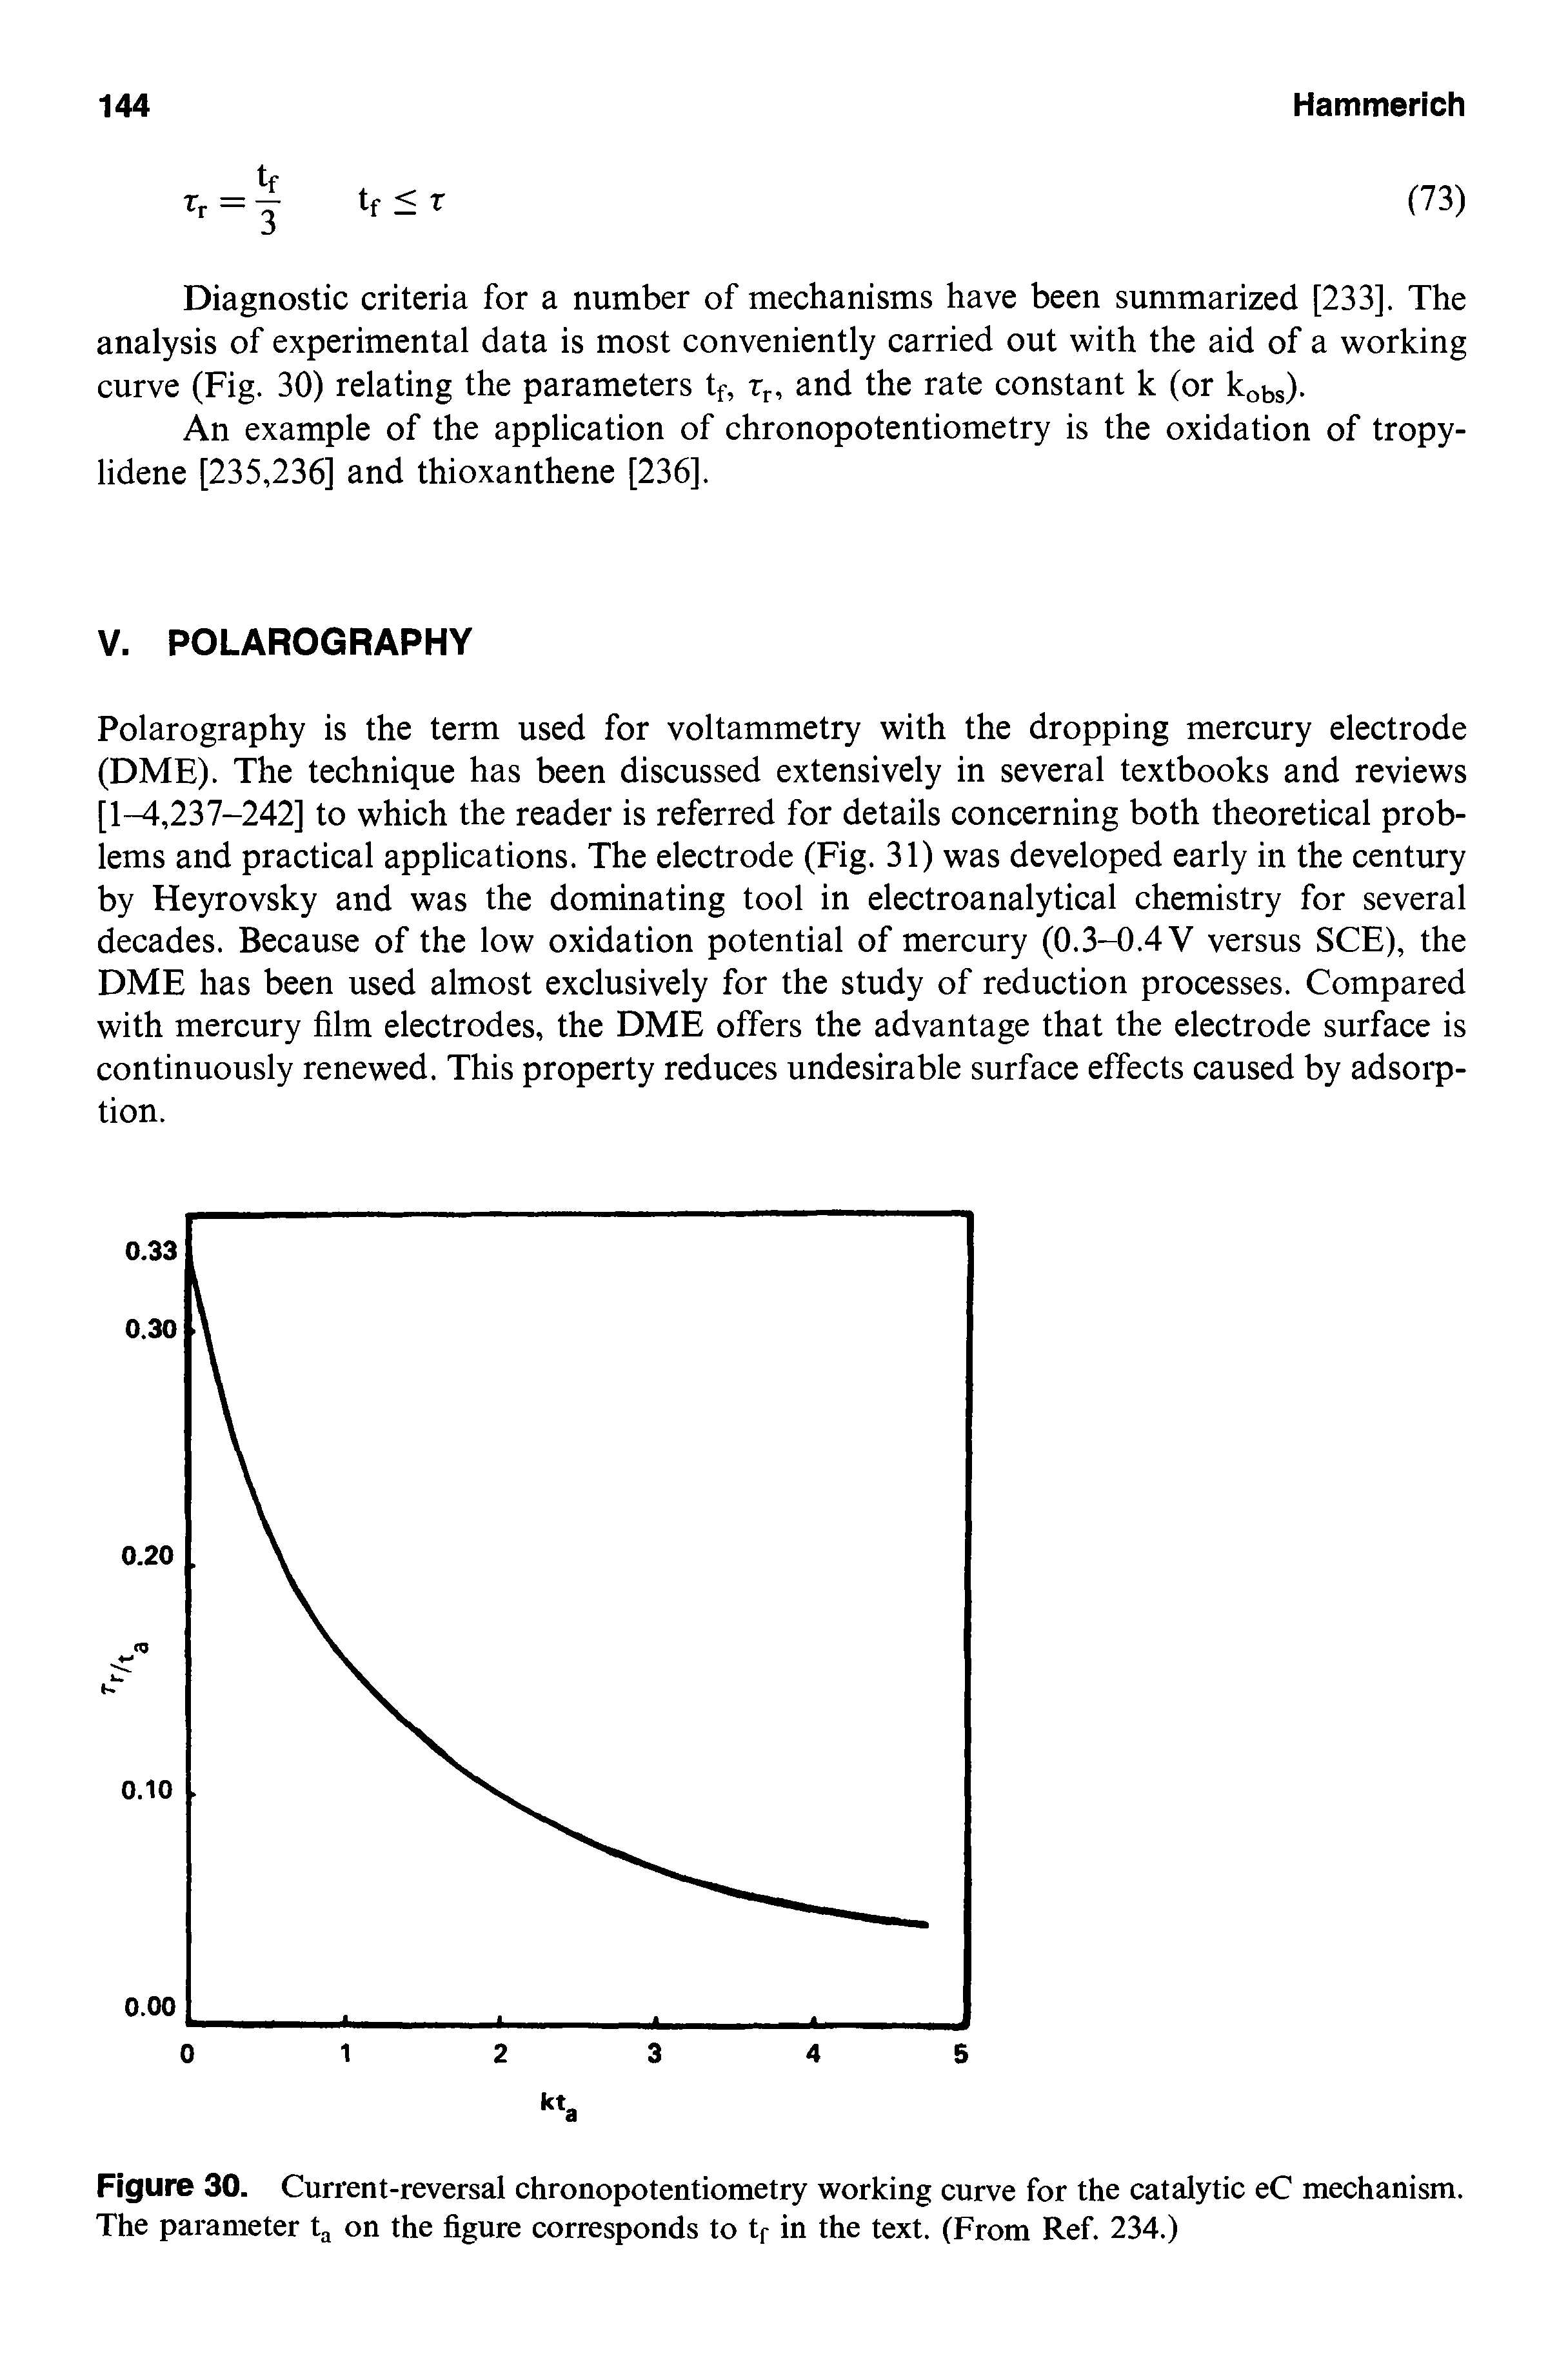 Figure 30. Current-reversal chronopotentiometry working curve for the catalytic eC mechanism. The parameter tg on the figure corresponds to tp in the text. (From Ref. 234.)...